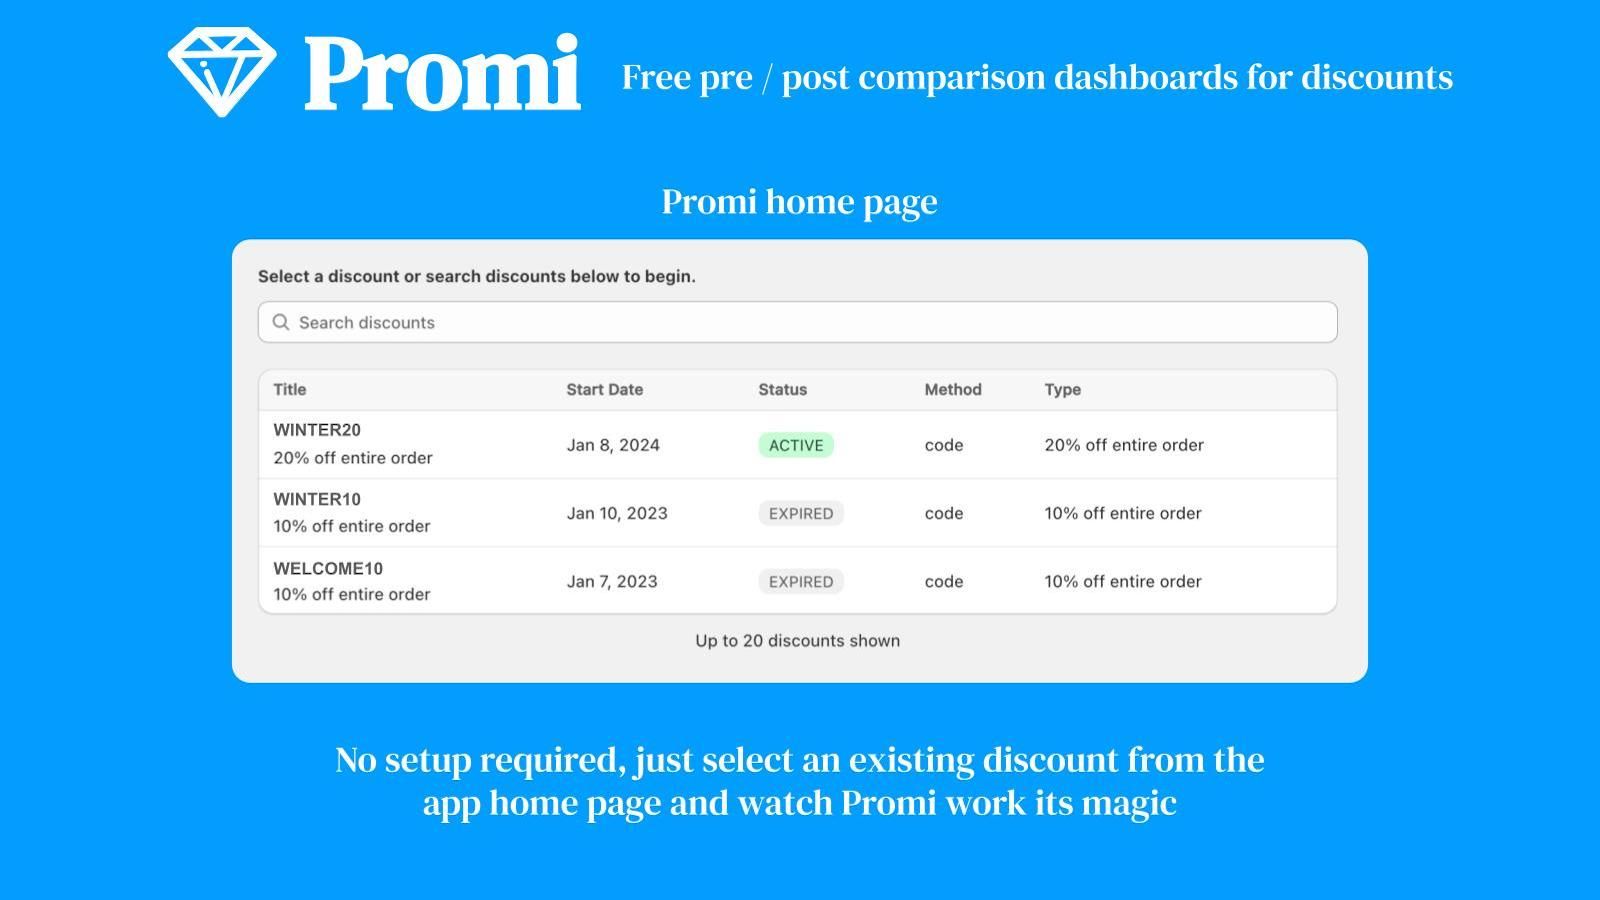 Promi home page